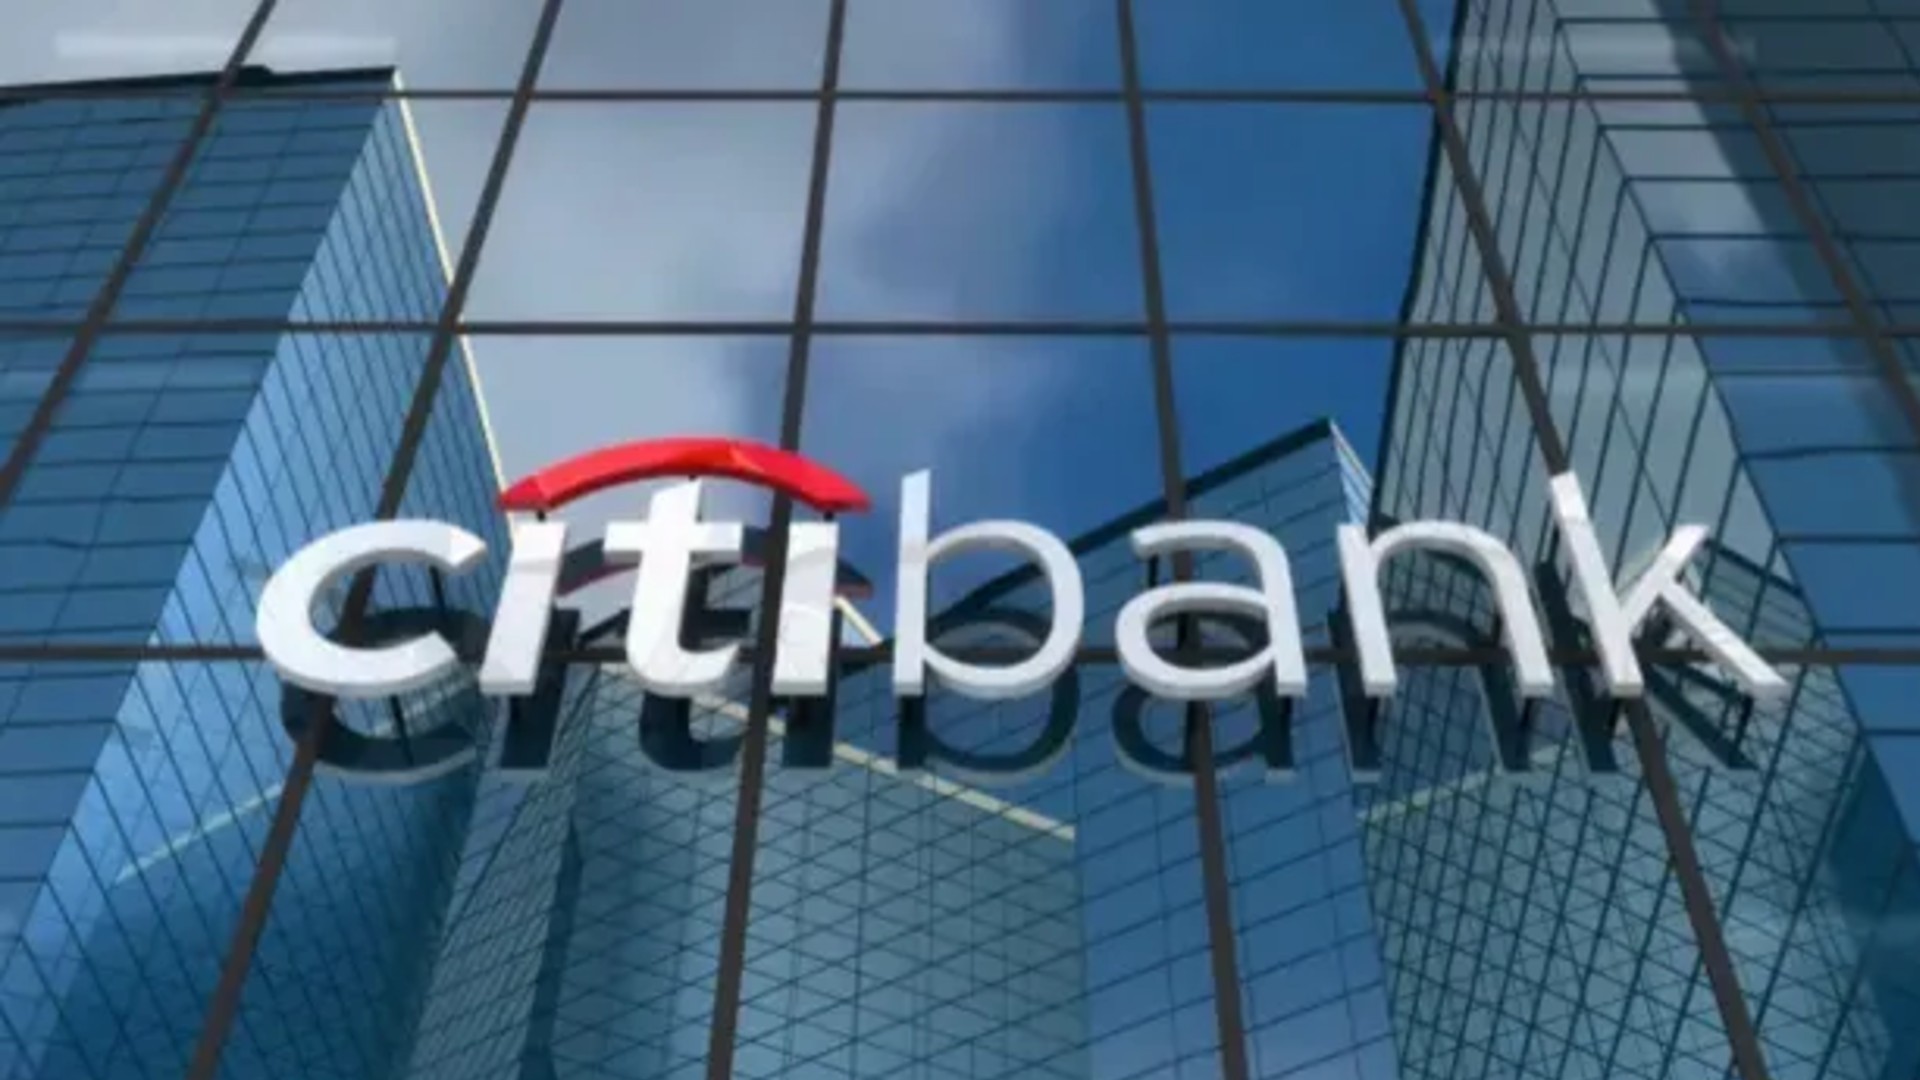 Citi Bank India: No Employee Will Be Fired, No Banking Customer Will Be Impacted